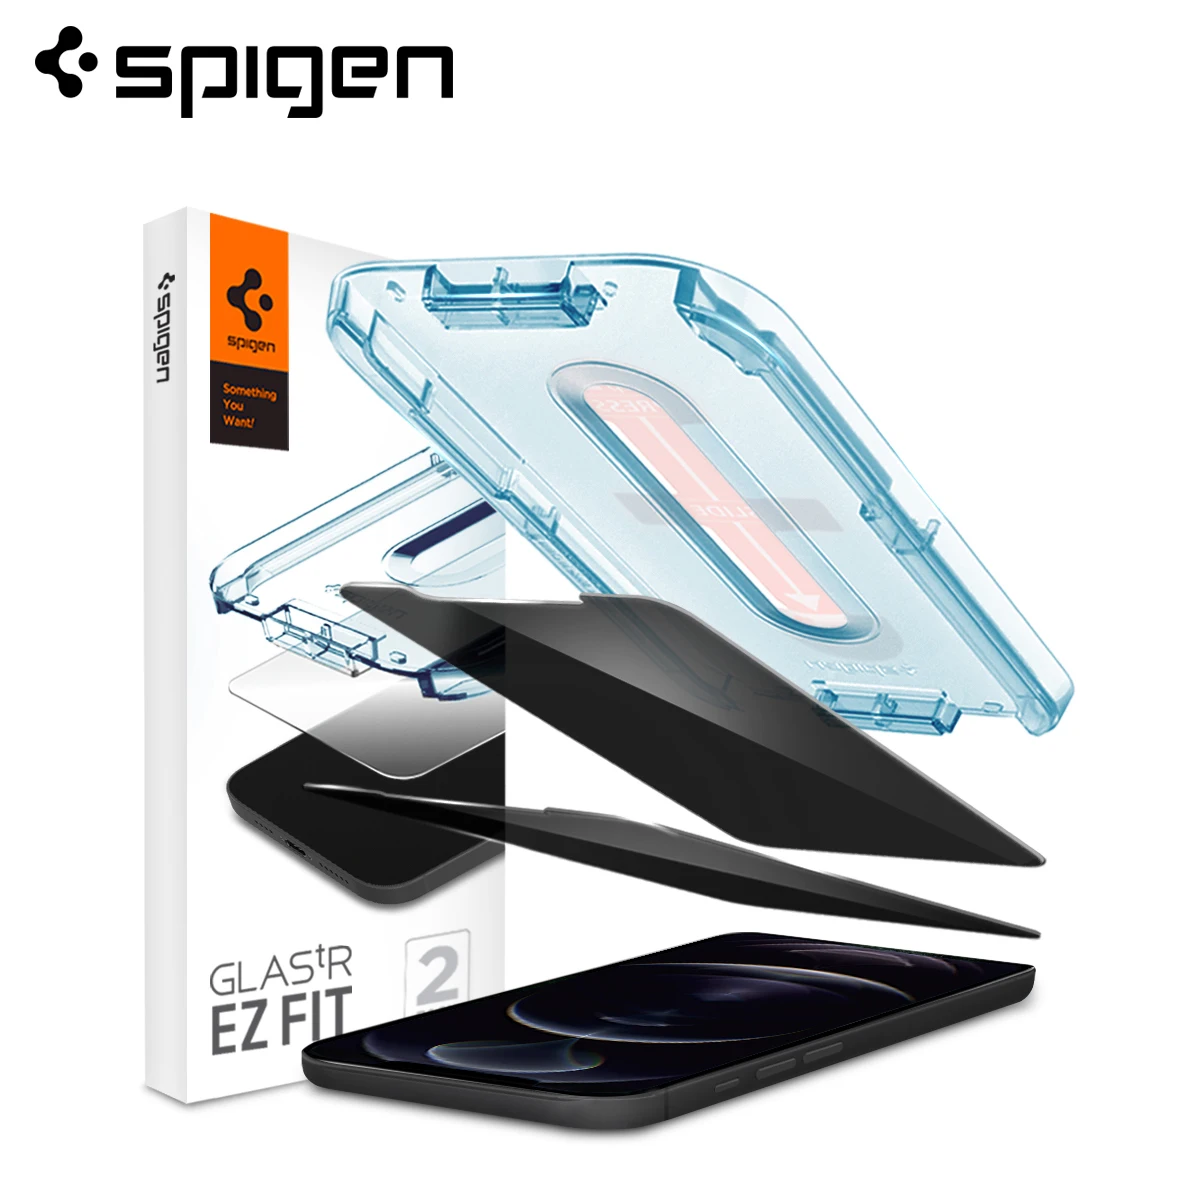 Spigen EZ FIT GLAS.tR Privacy Screen Protector for iPhone 12 Pro Max (6.7